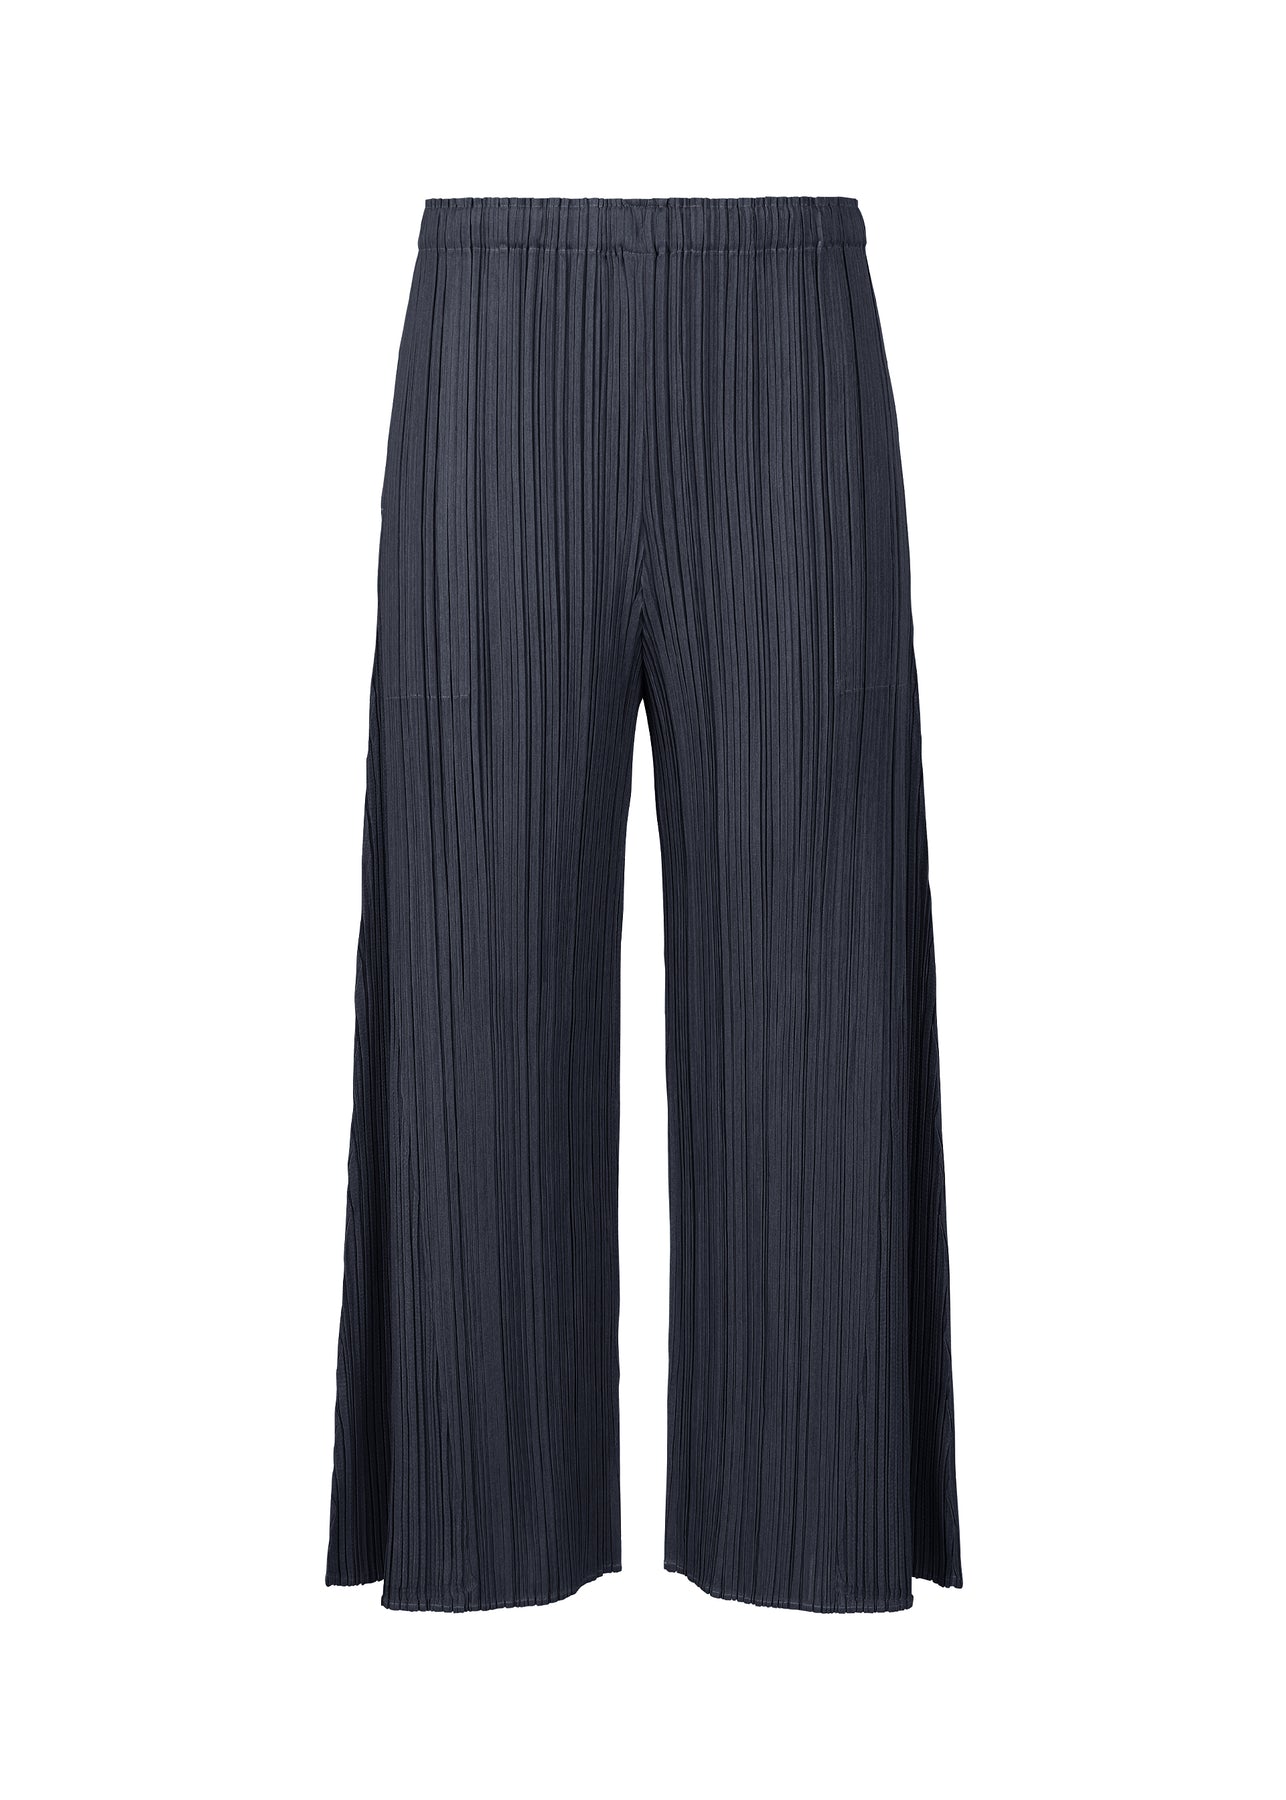 MELLOW PLEATS PANTS | The official ISSEY MIYAKE ONLINE STORE